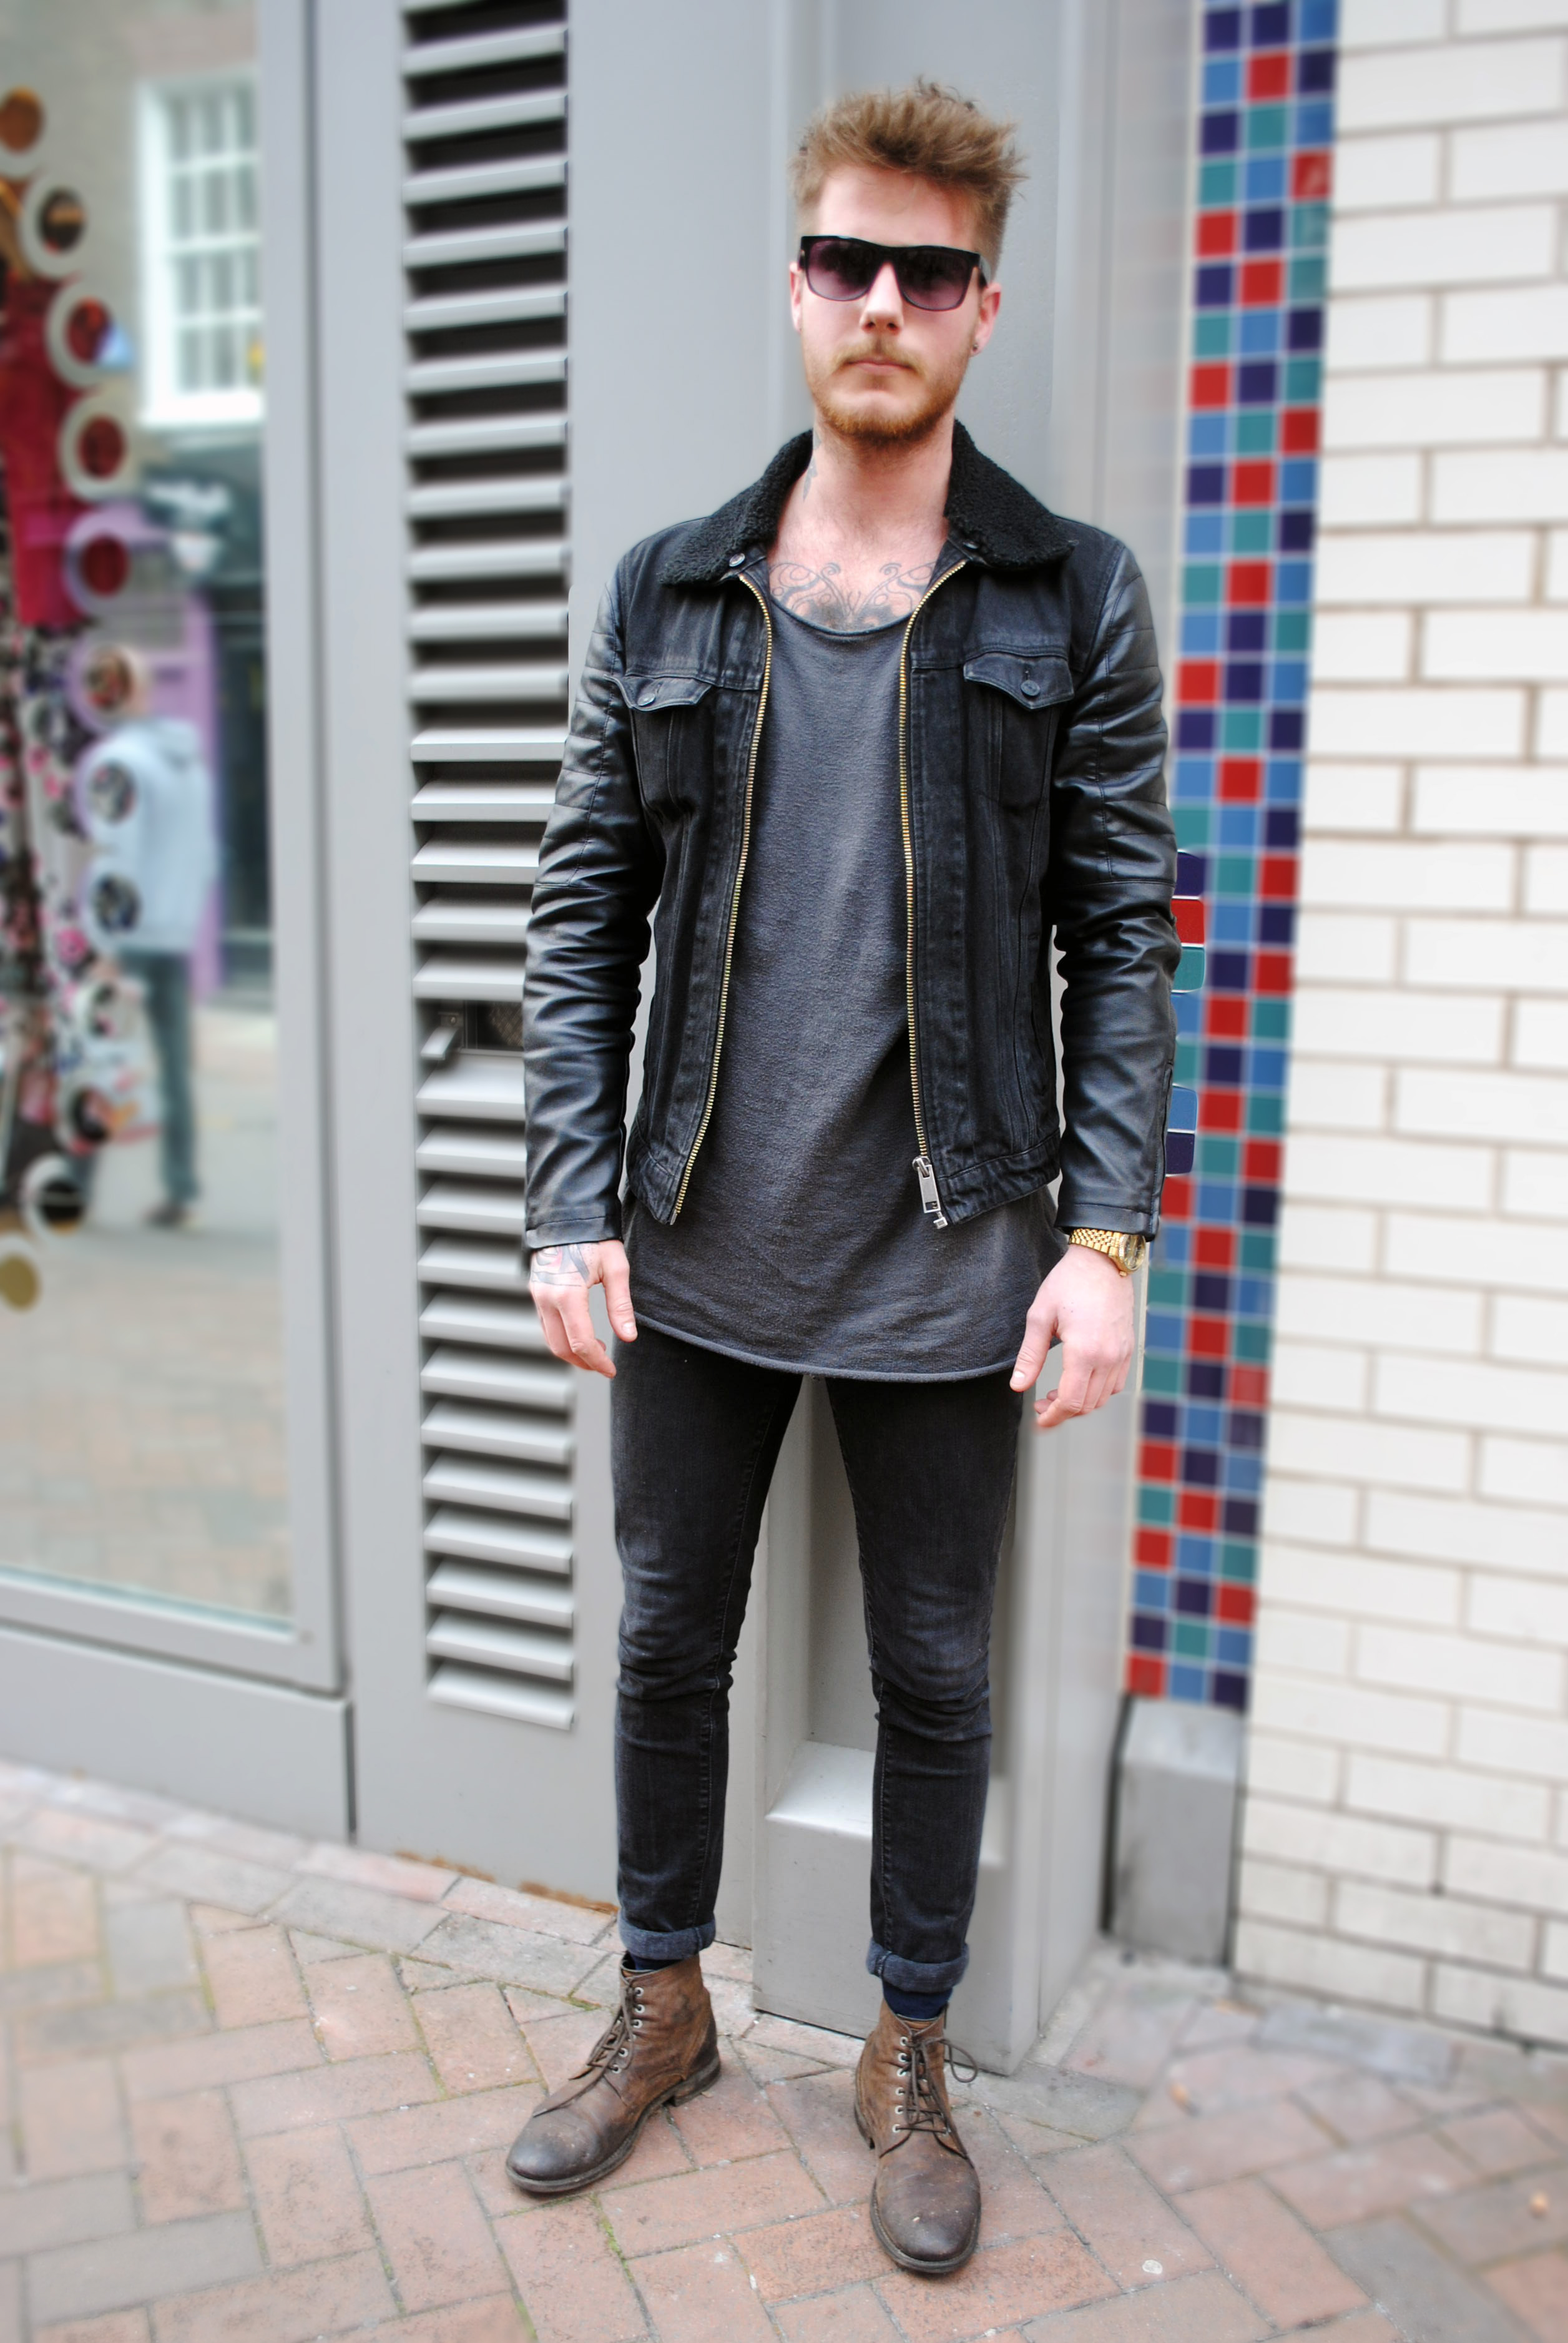 STREET STYLE: GOTH DETECTIVES - London On The Inside